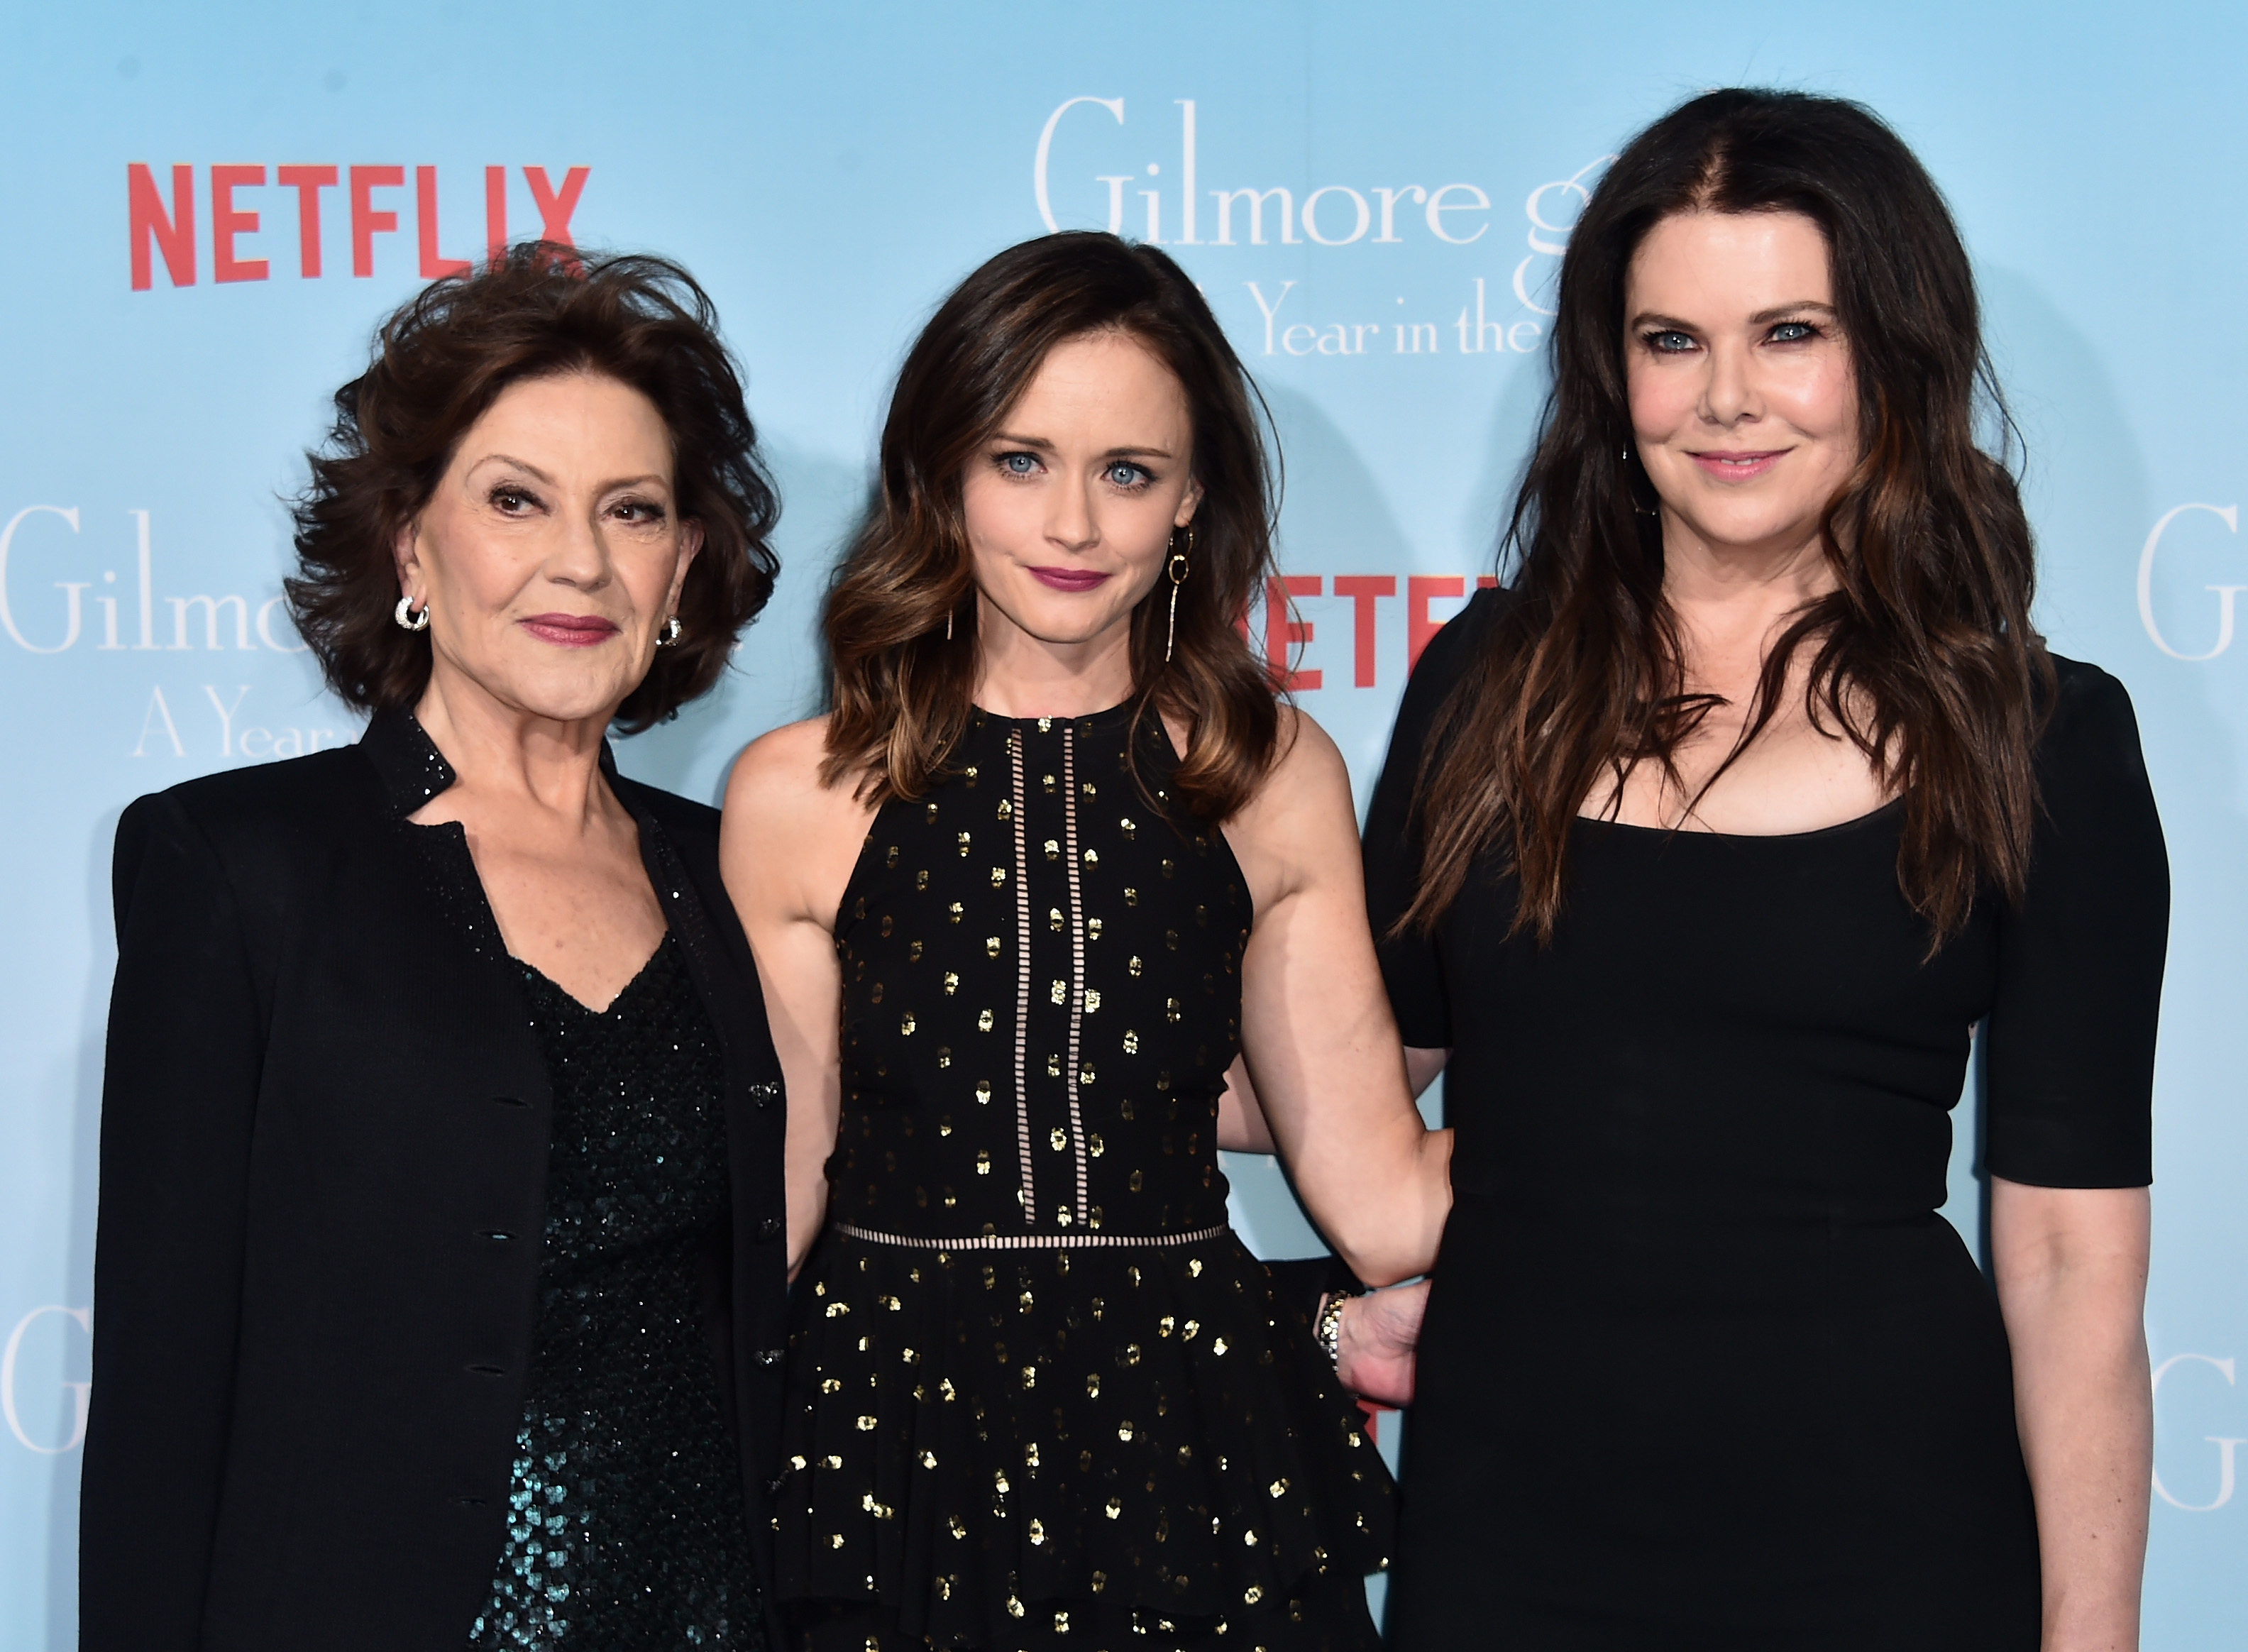 The Gilmore Girls A Year In The Life Premiere Proved That Even The